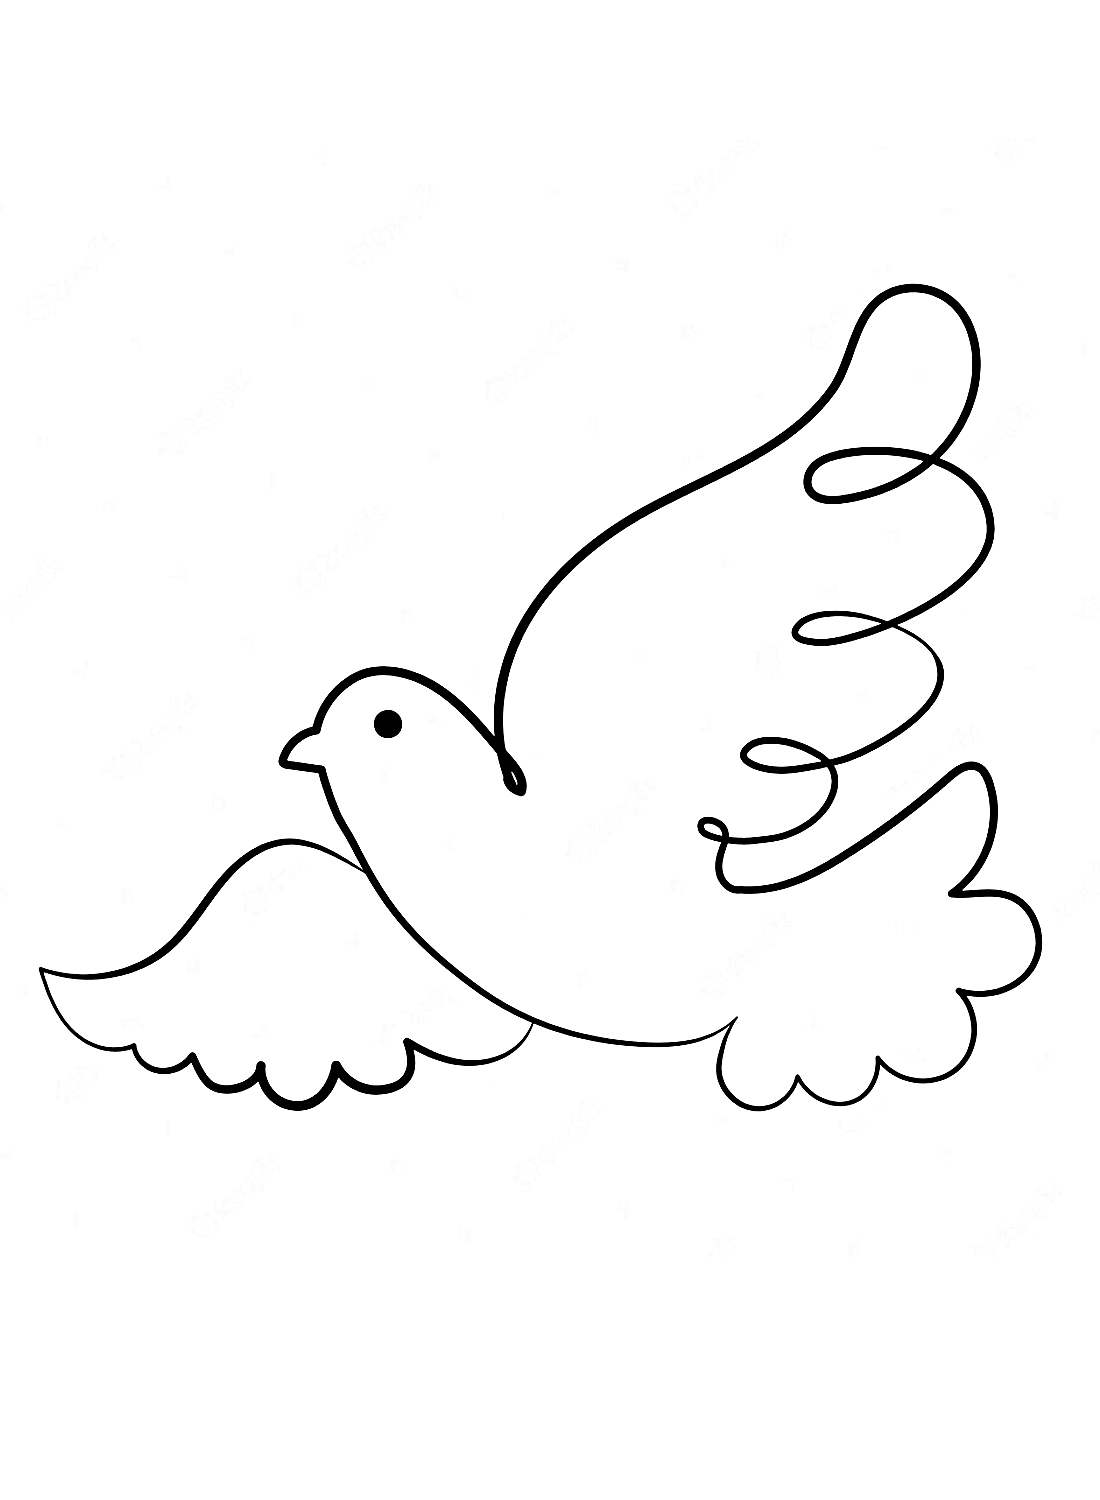 A dove icon Coloring Page - Free Printable Coloring Pages